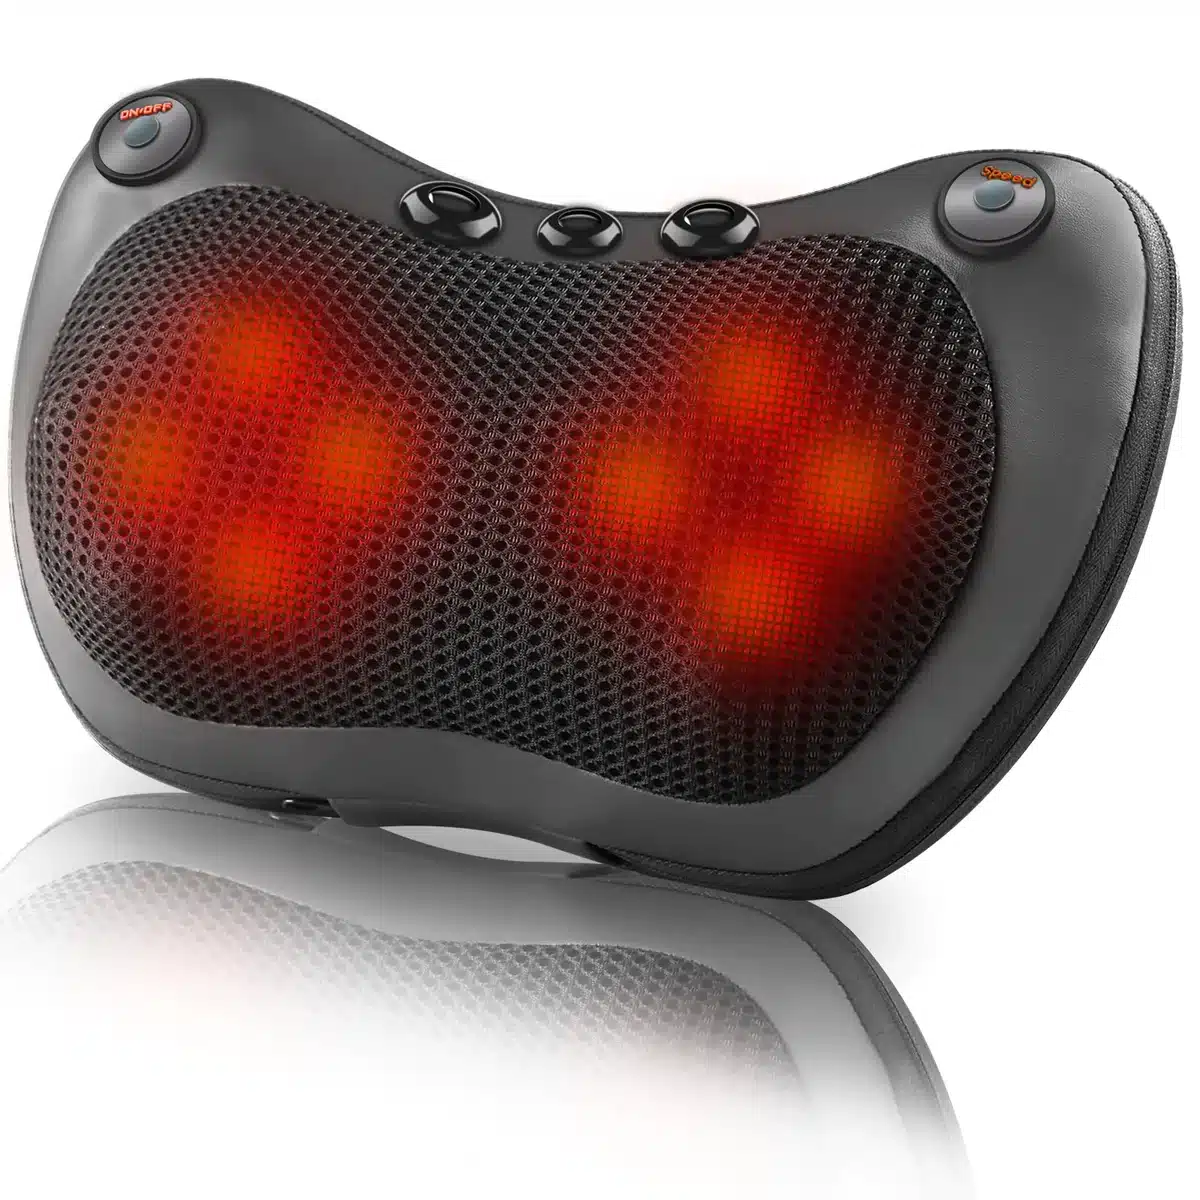 Glorace Electric Heated Massager Review